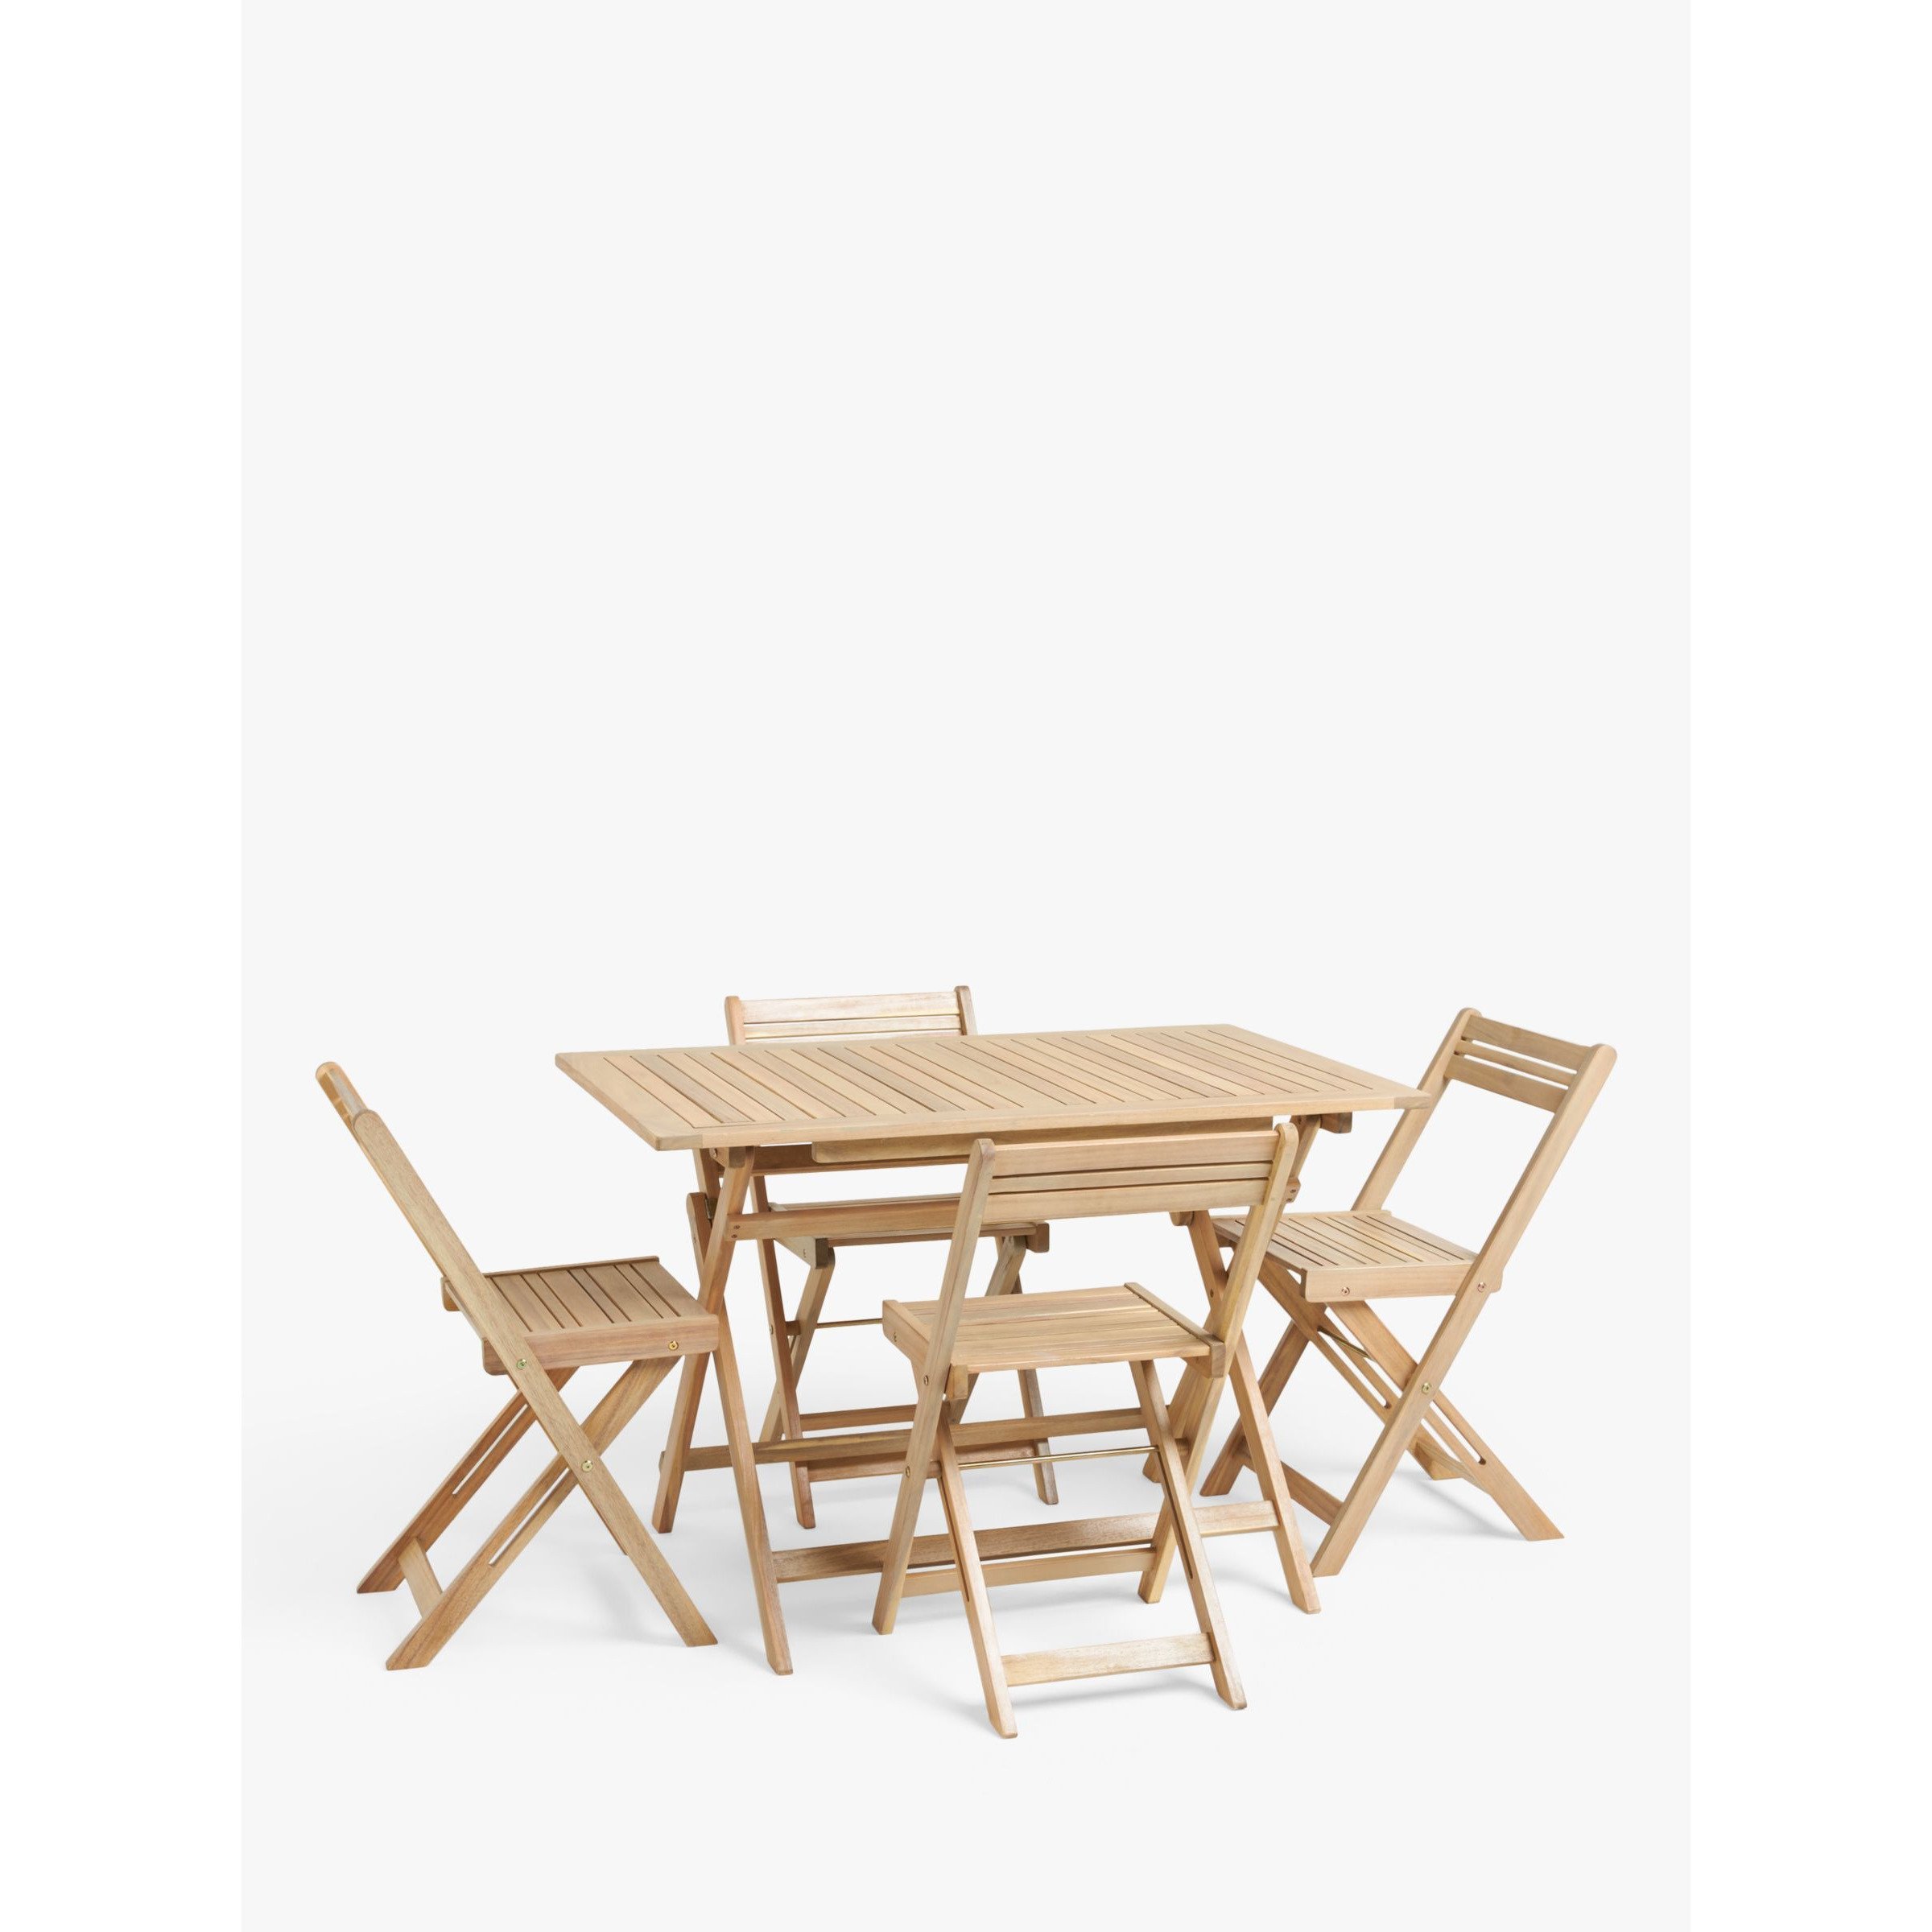 John Lewis ANYDAY Acacia Wood Foldable 4-Seater Garden Dining Table & Chairs Set, Natural - image 1